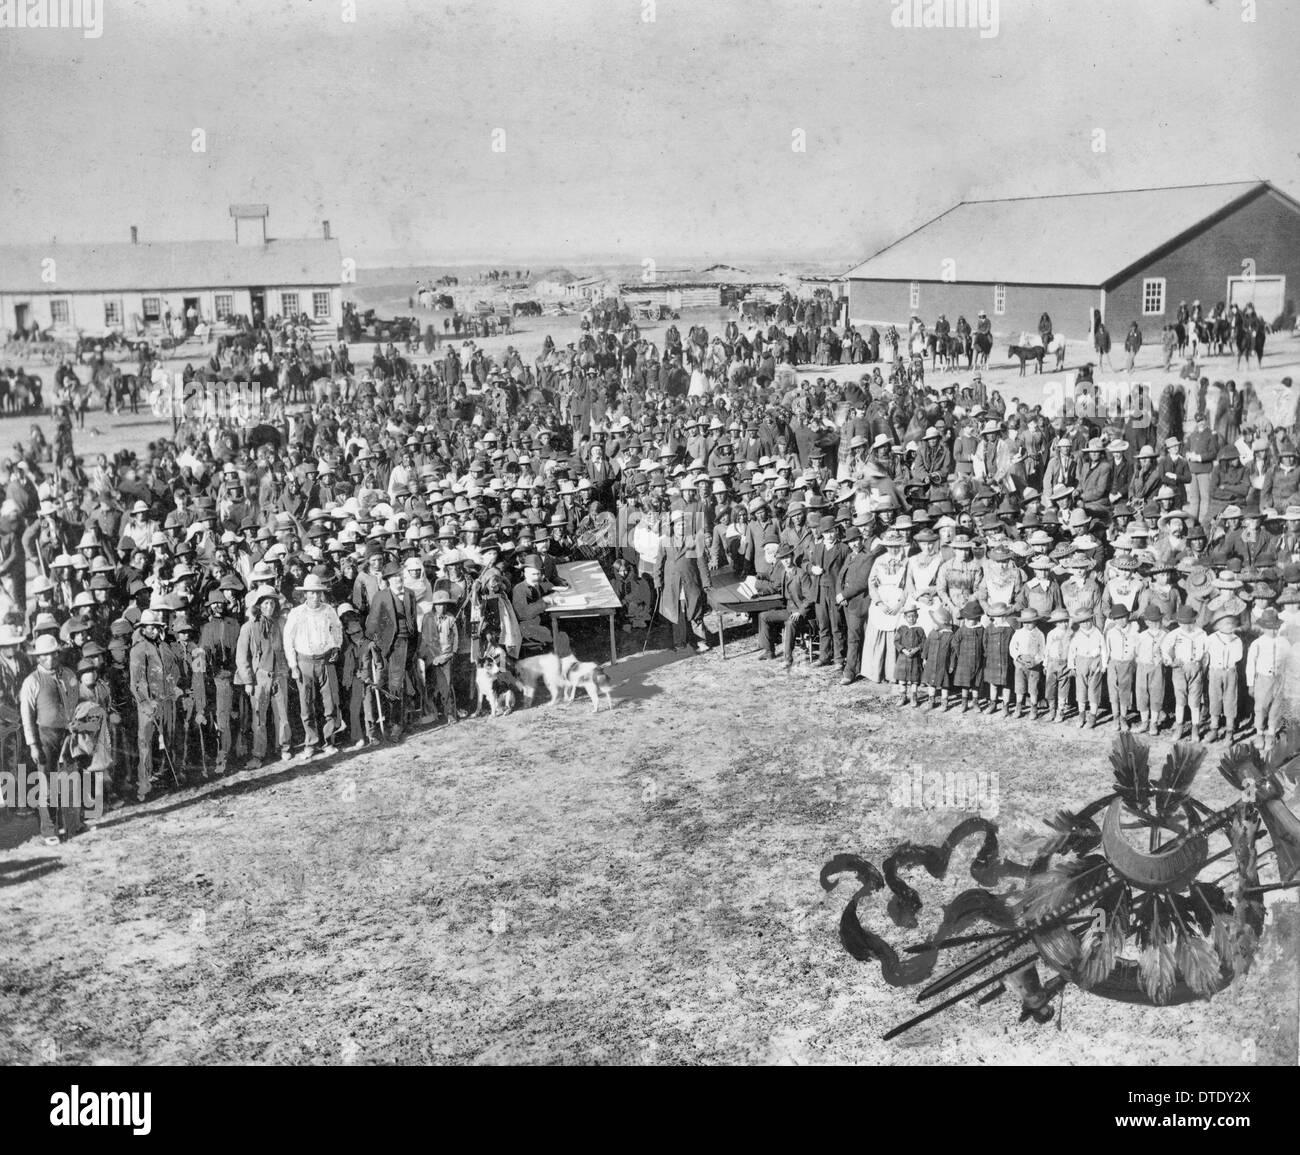 Taking the census at Standing Rock Agency - South Dakota - Men seated at two tables with large crowd of people. 1900 Stock Photo